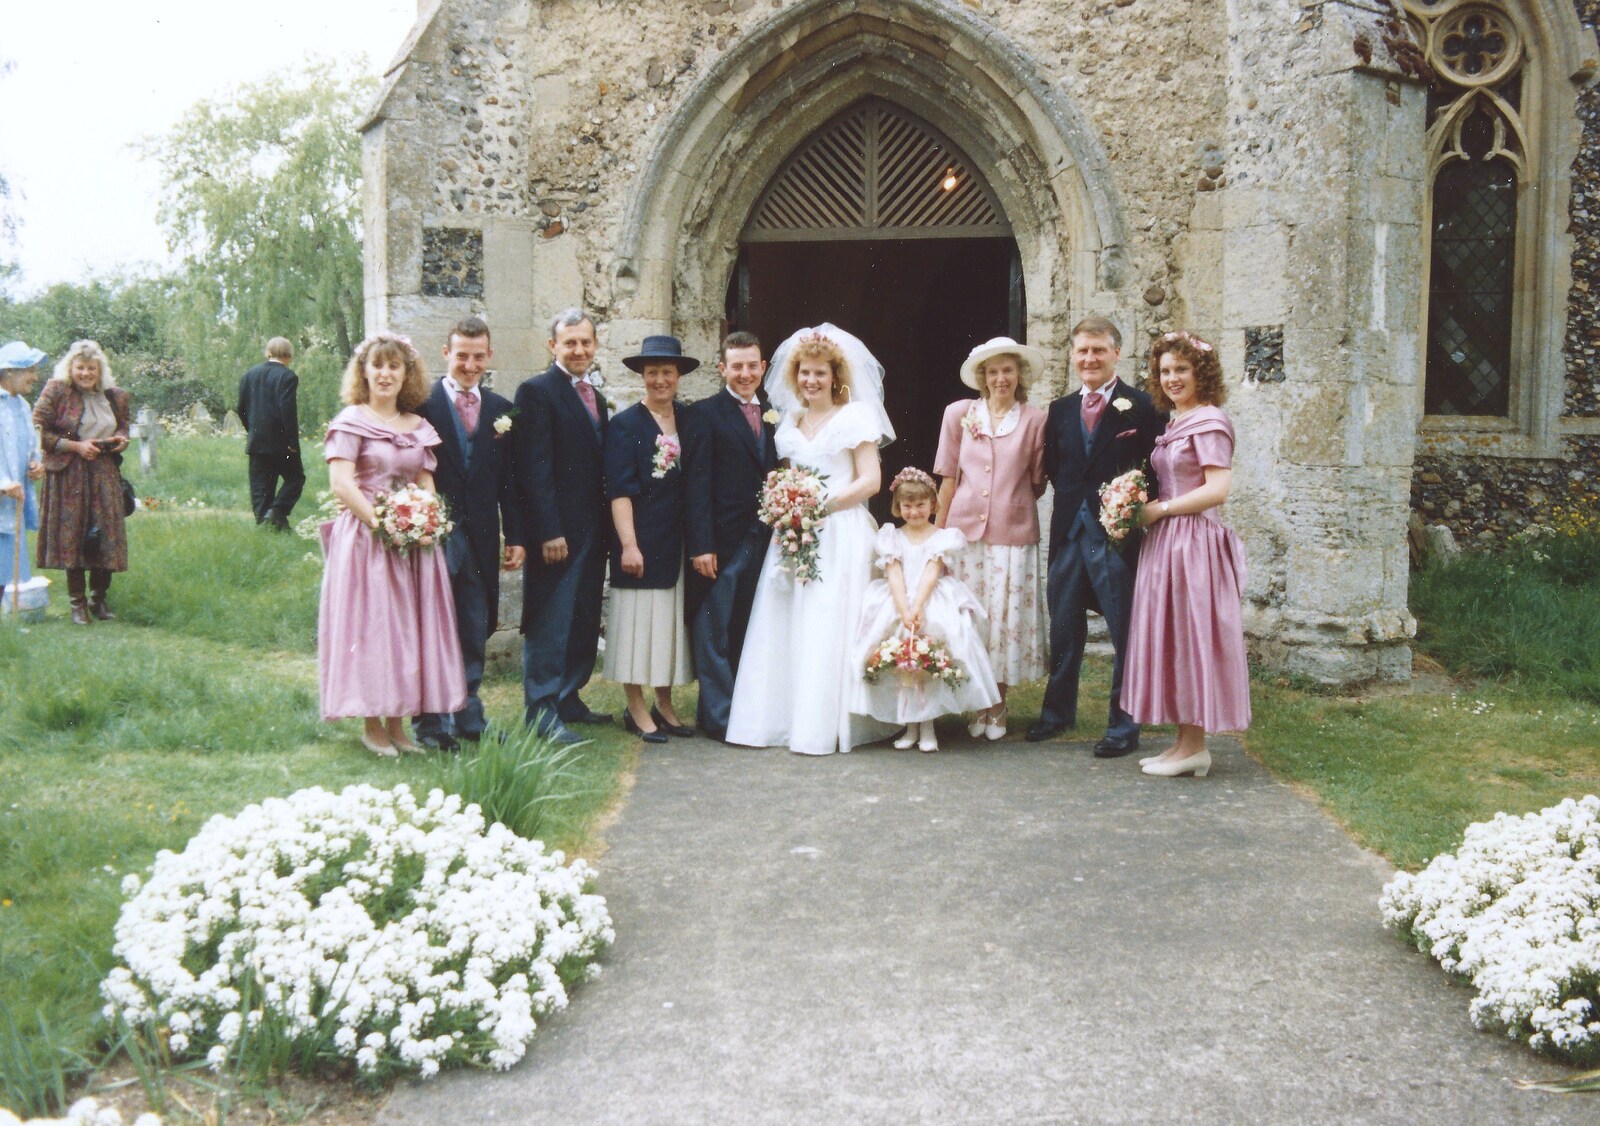 A big group photo outside the church from Debbie's Wedding, Suffolk - 12th June 1999